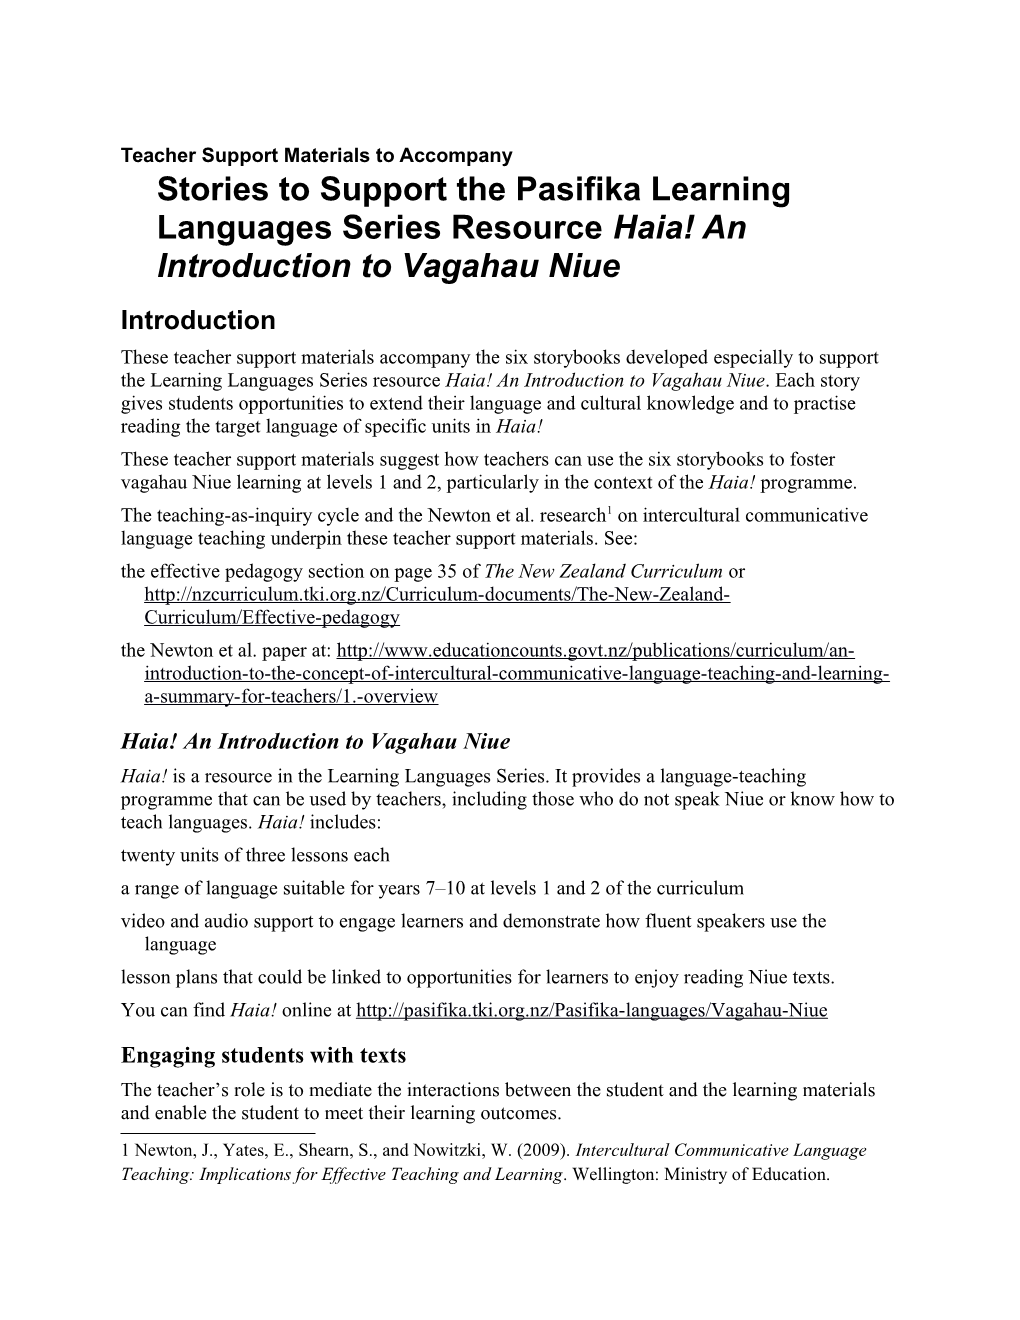 Teacher Support Materials to Accompanystories to Support the Pasifika Learning Languages